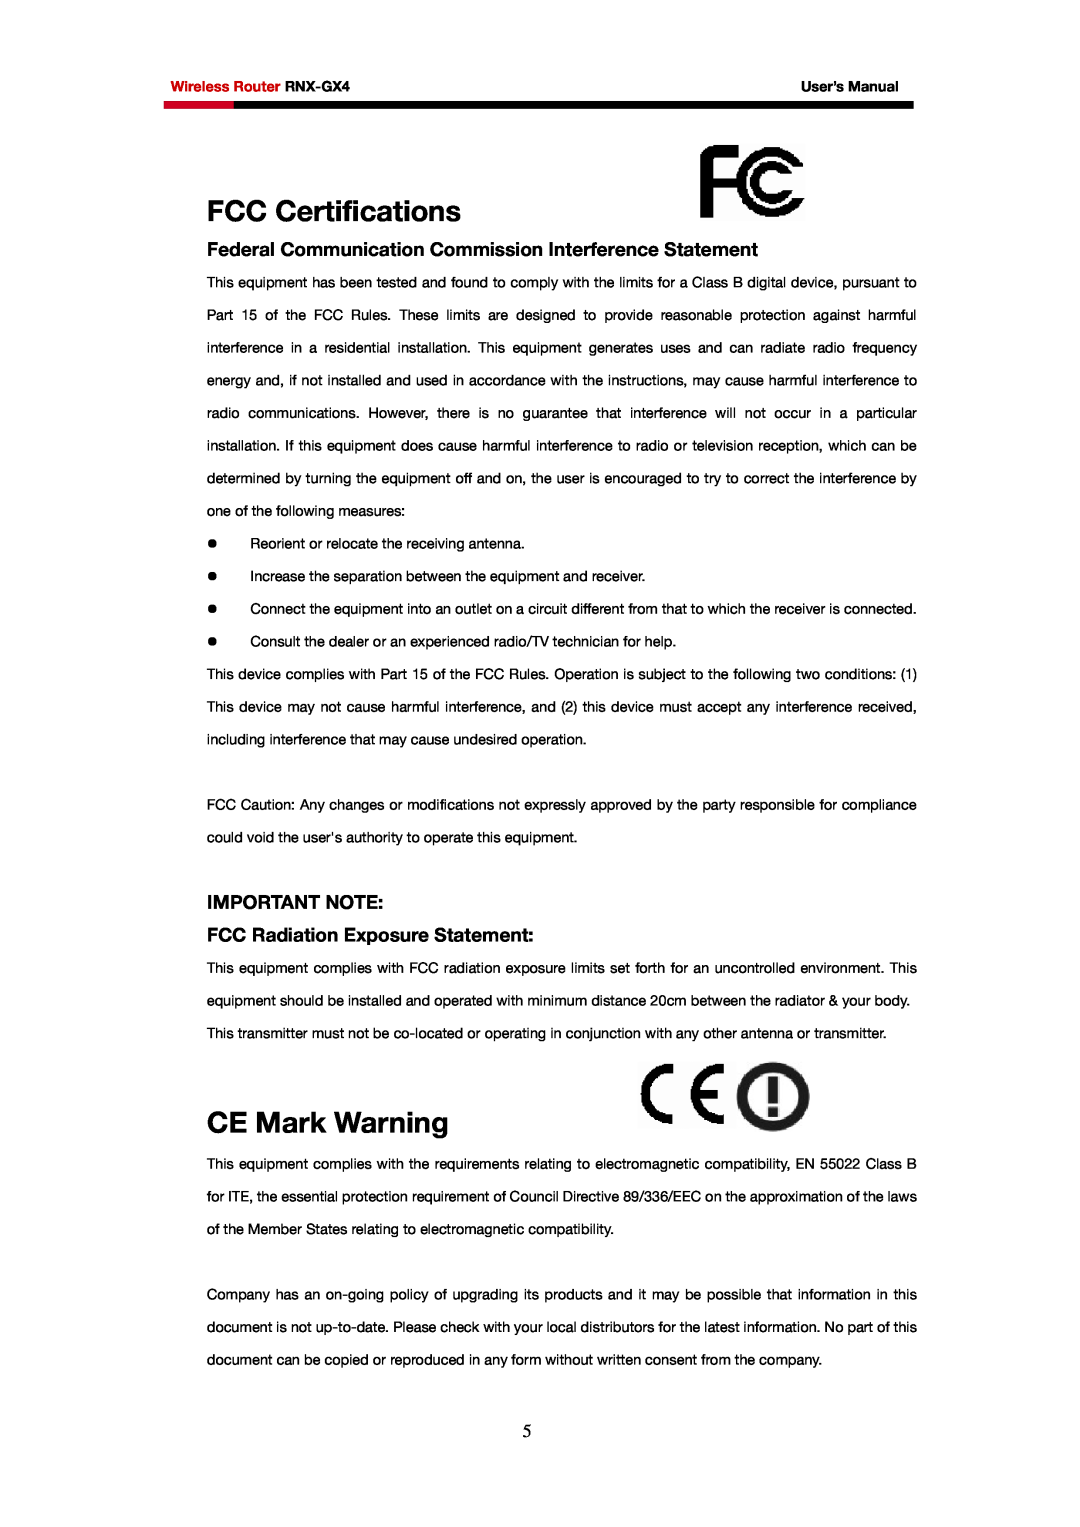 Rosewill RNX-GX4 user manual FCC Certifications, CE Mark Warning, Federal Communication Commission Interference Statement 